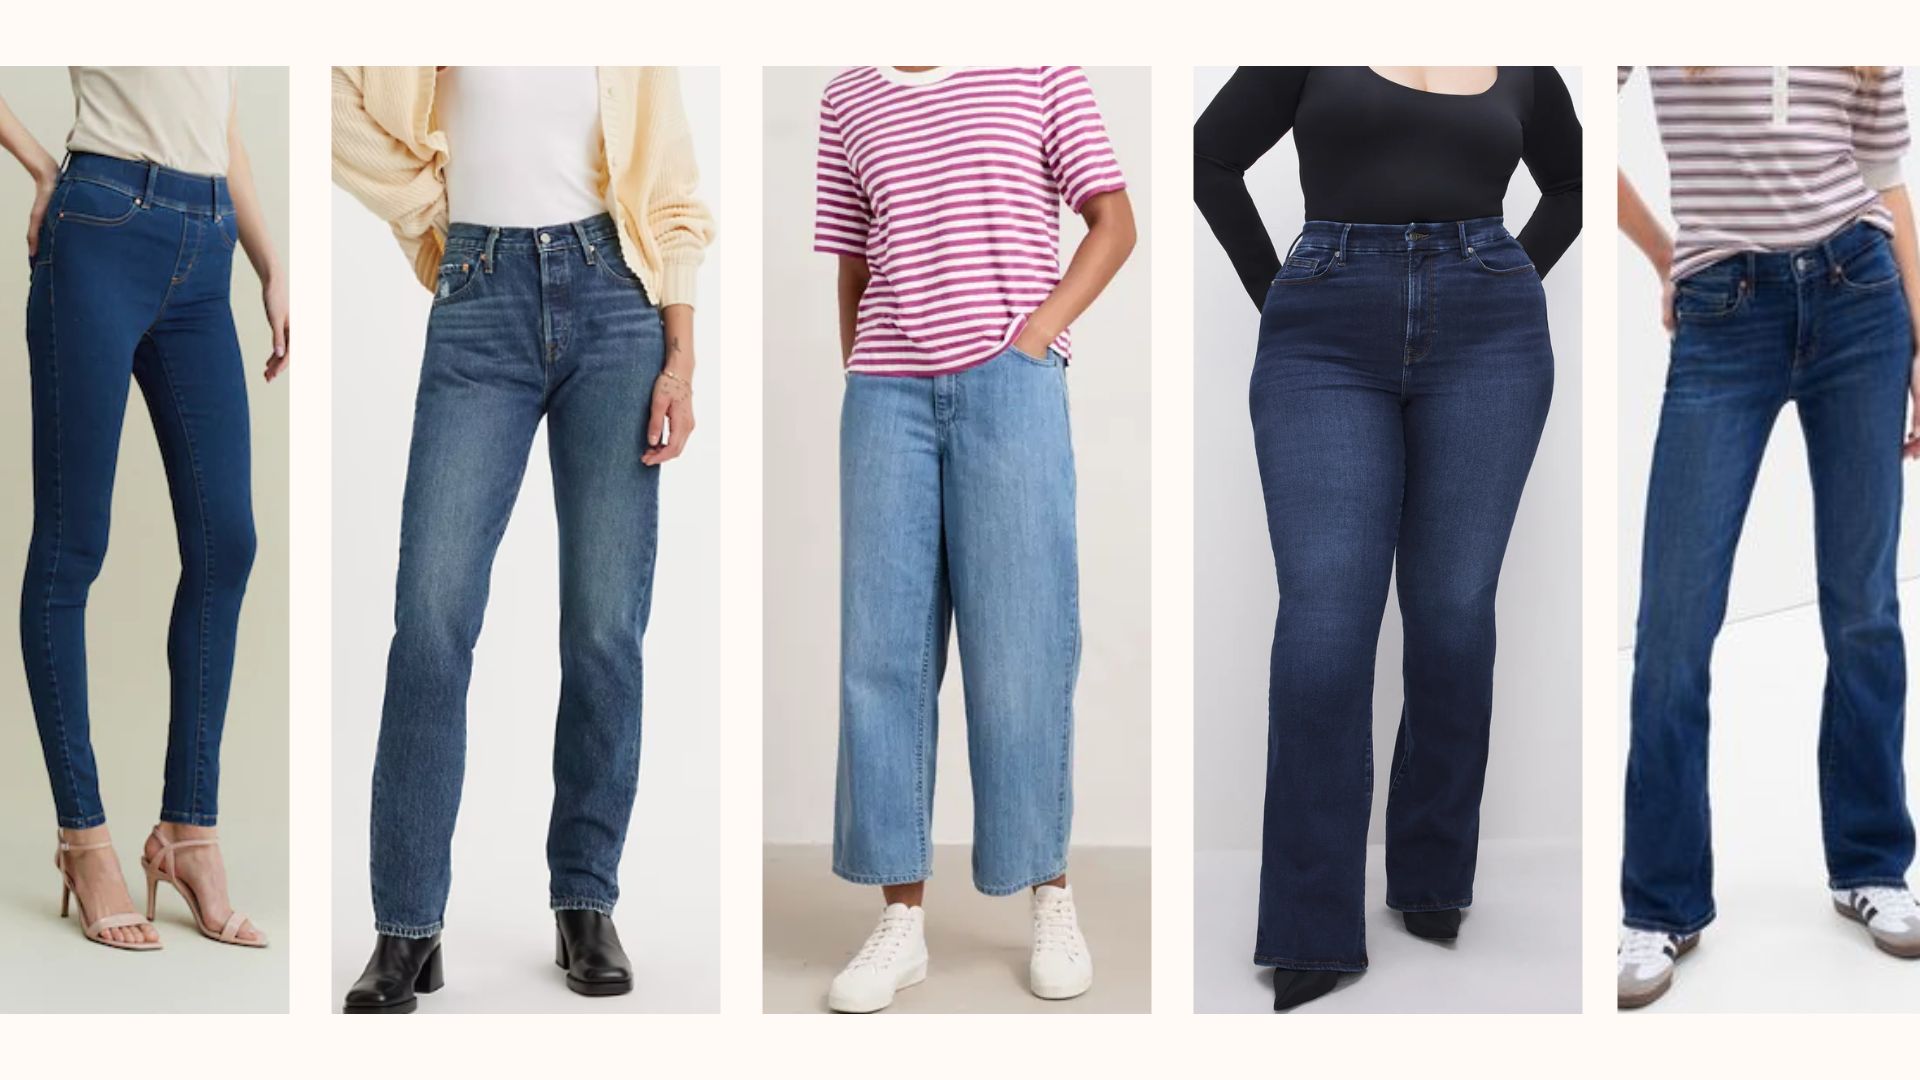 The best jeans for women over 60 according to style experts